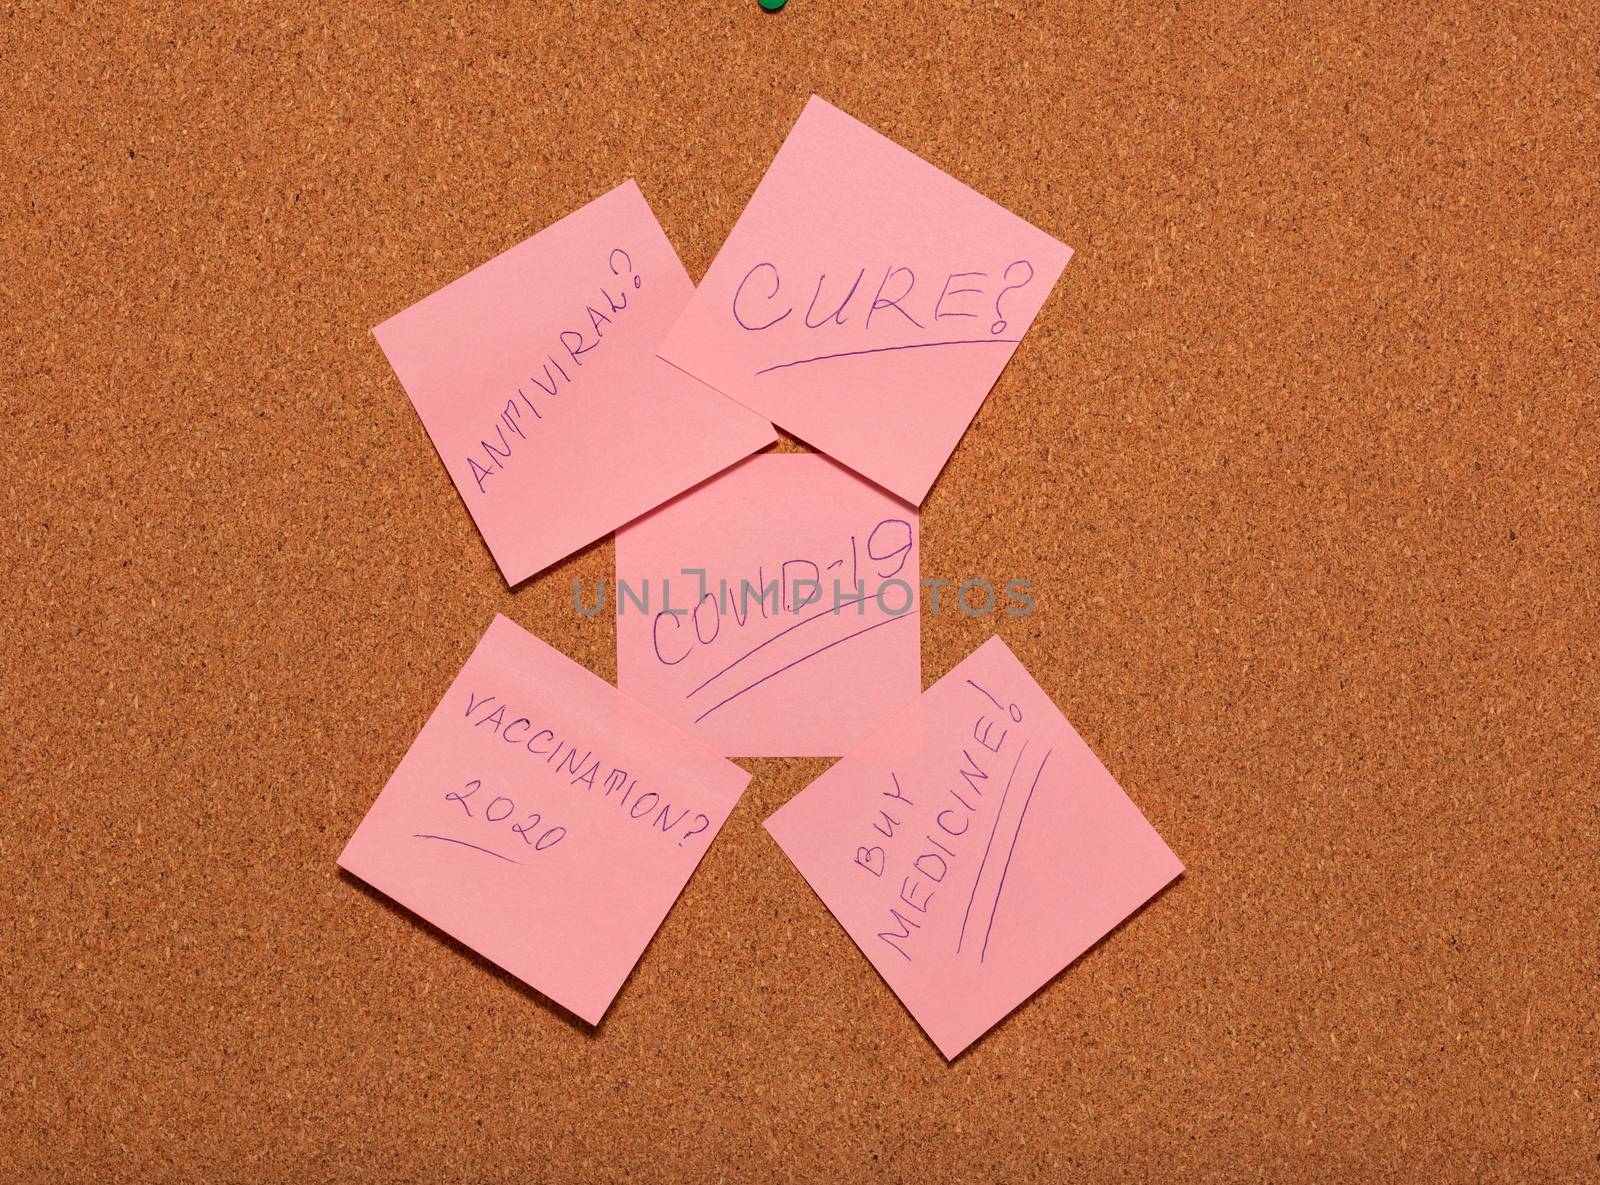 Antiviral?, Cure?, Vaccination 2020?, Buy Medicine! handwritten on four pink stickers around and covering the fifth one with Covid-19 on a cork notice-board. Healthcare and social concepts.